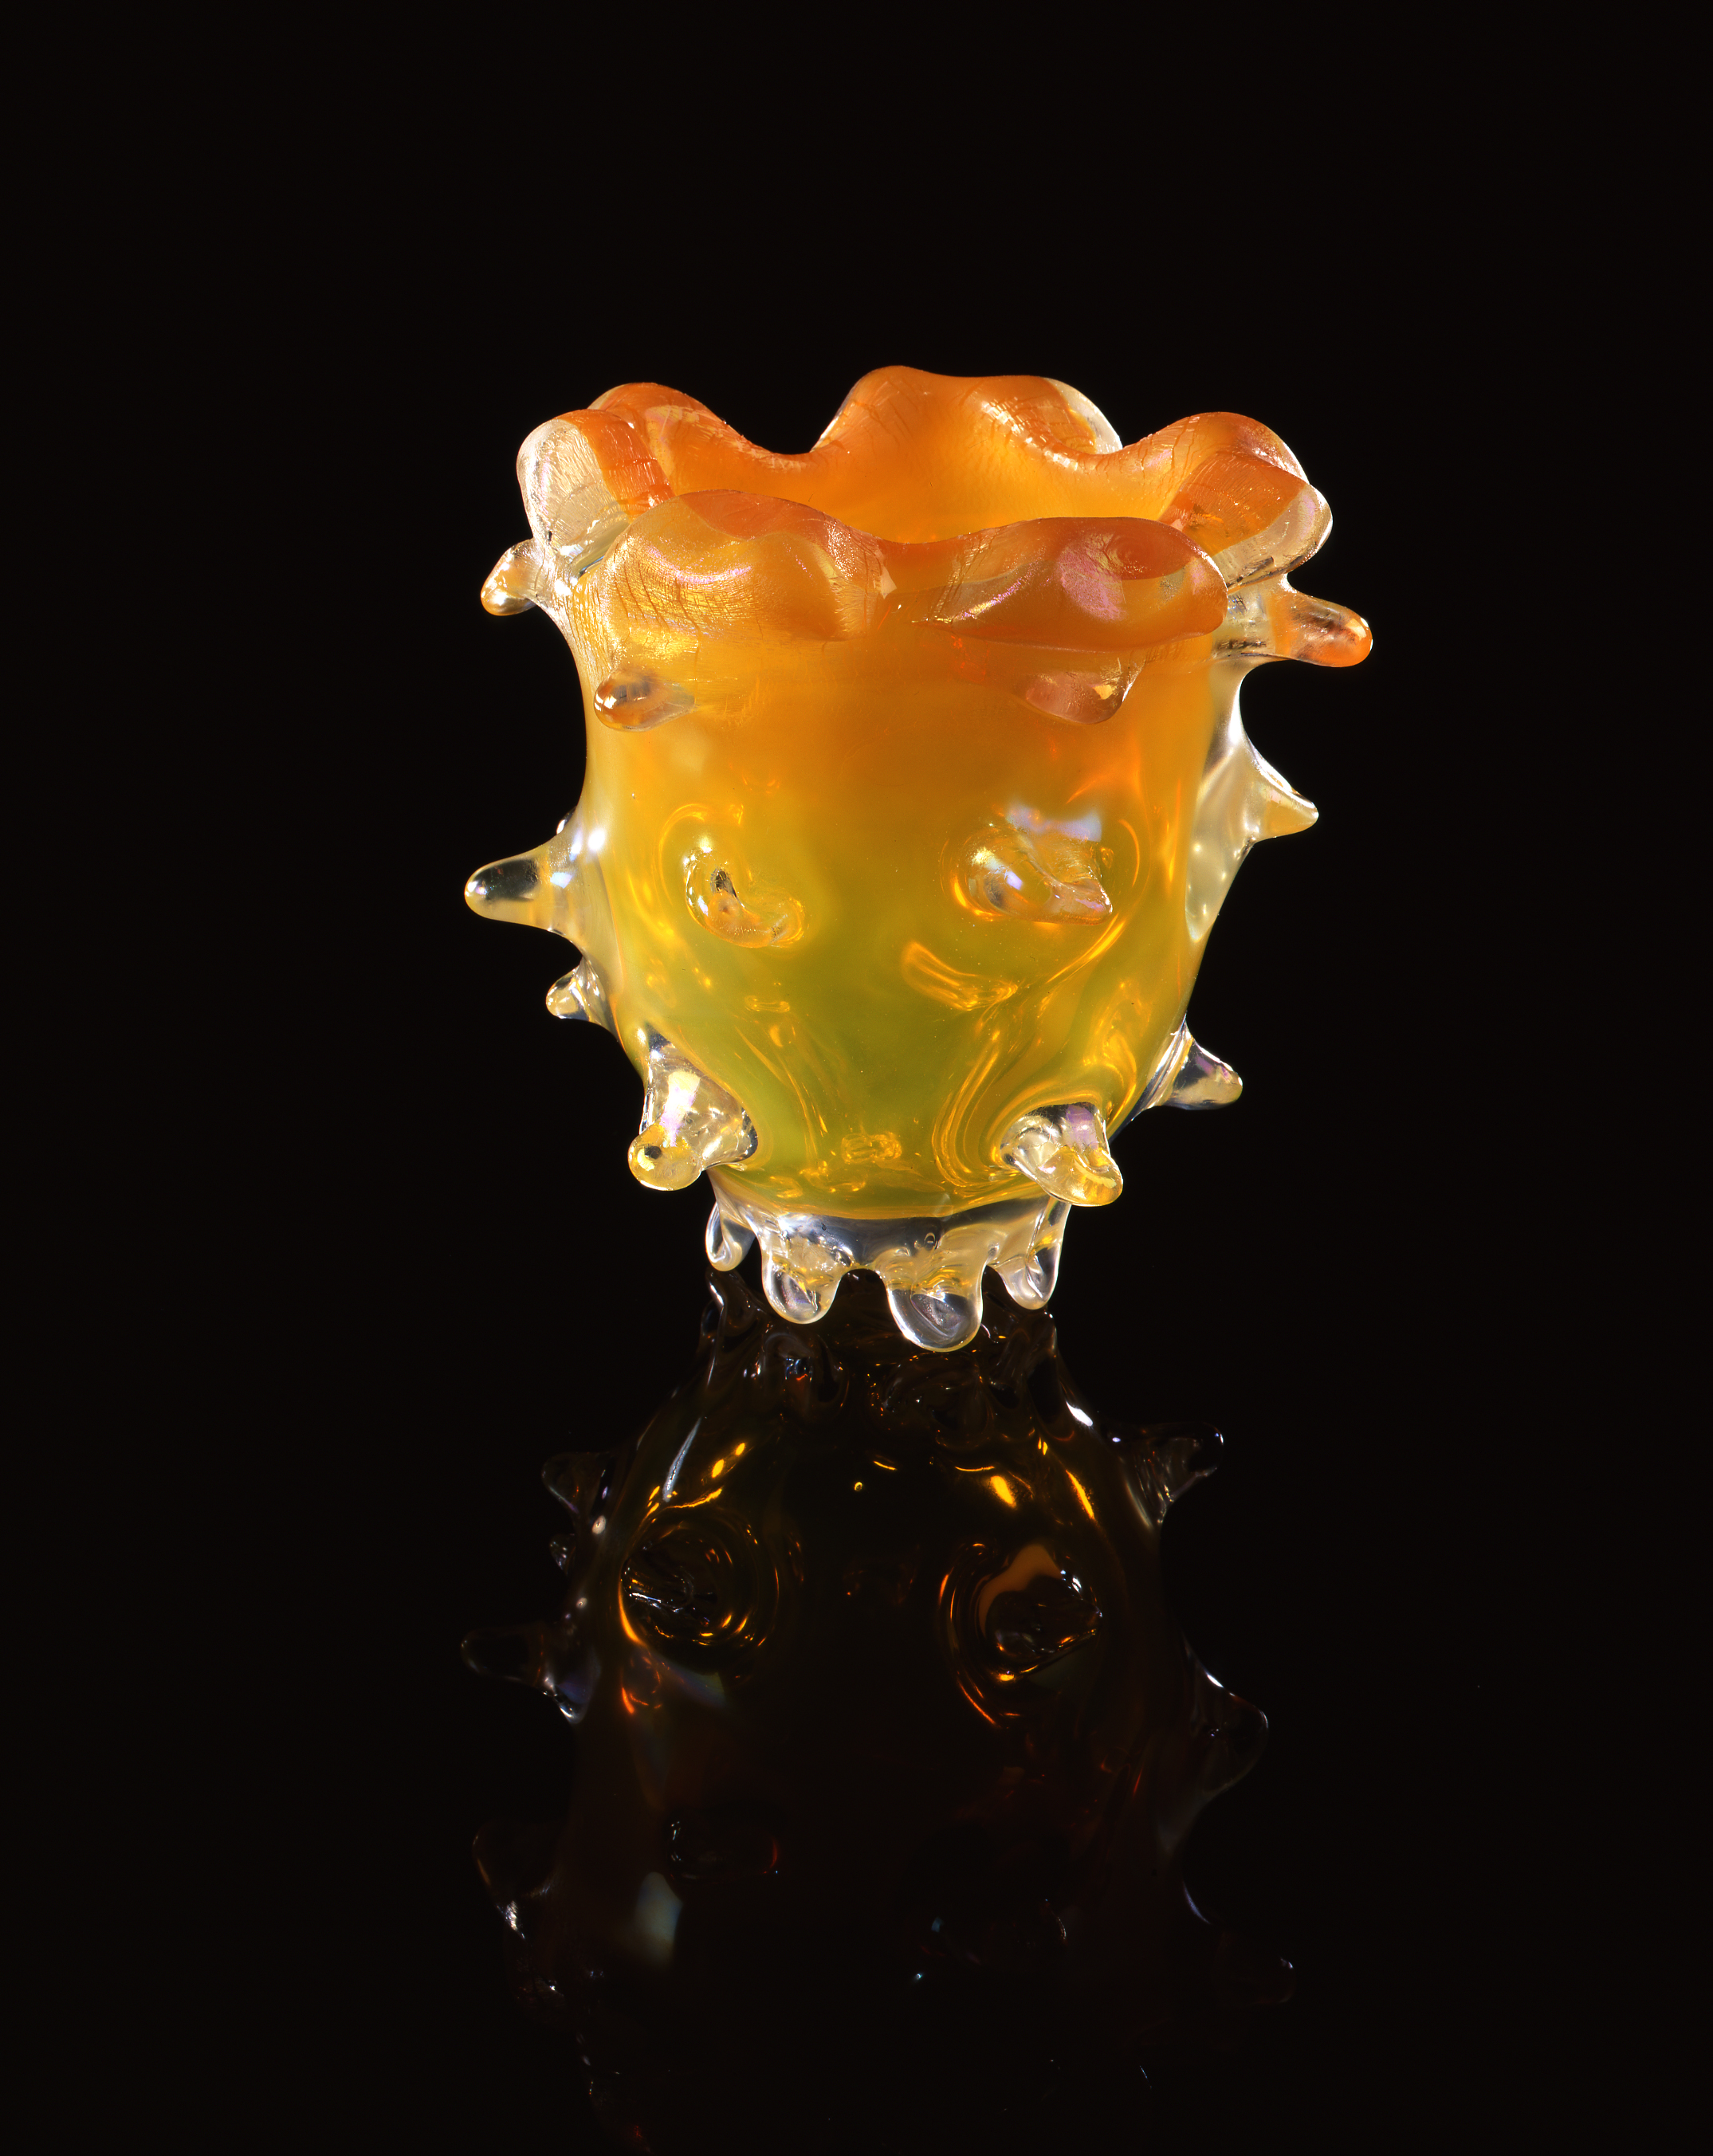  Dale Chihuly,&nbsp; Yellow Sand Piccolo Venetian with Clear Prunts &nbsp;(1997, glass, 6 x 6 x 6&nbsp;inches) 